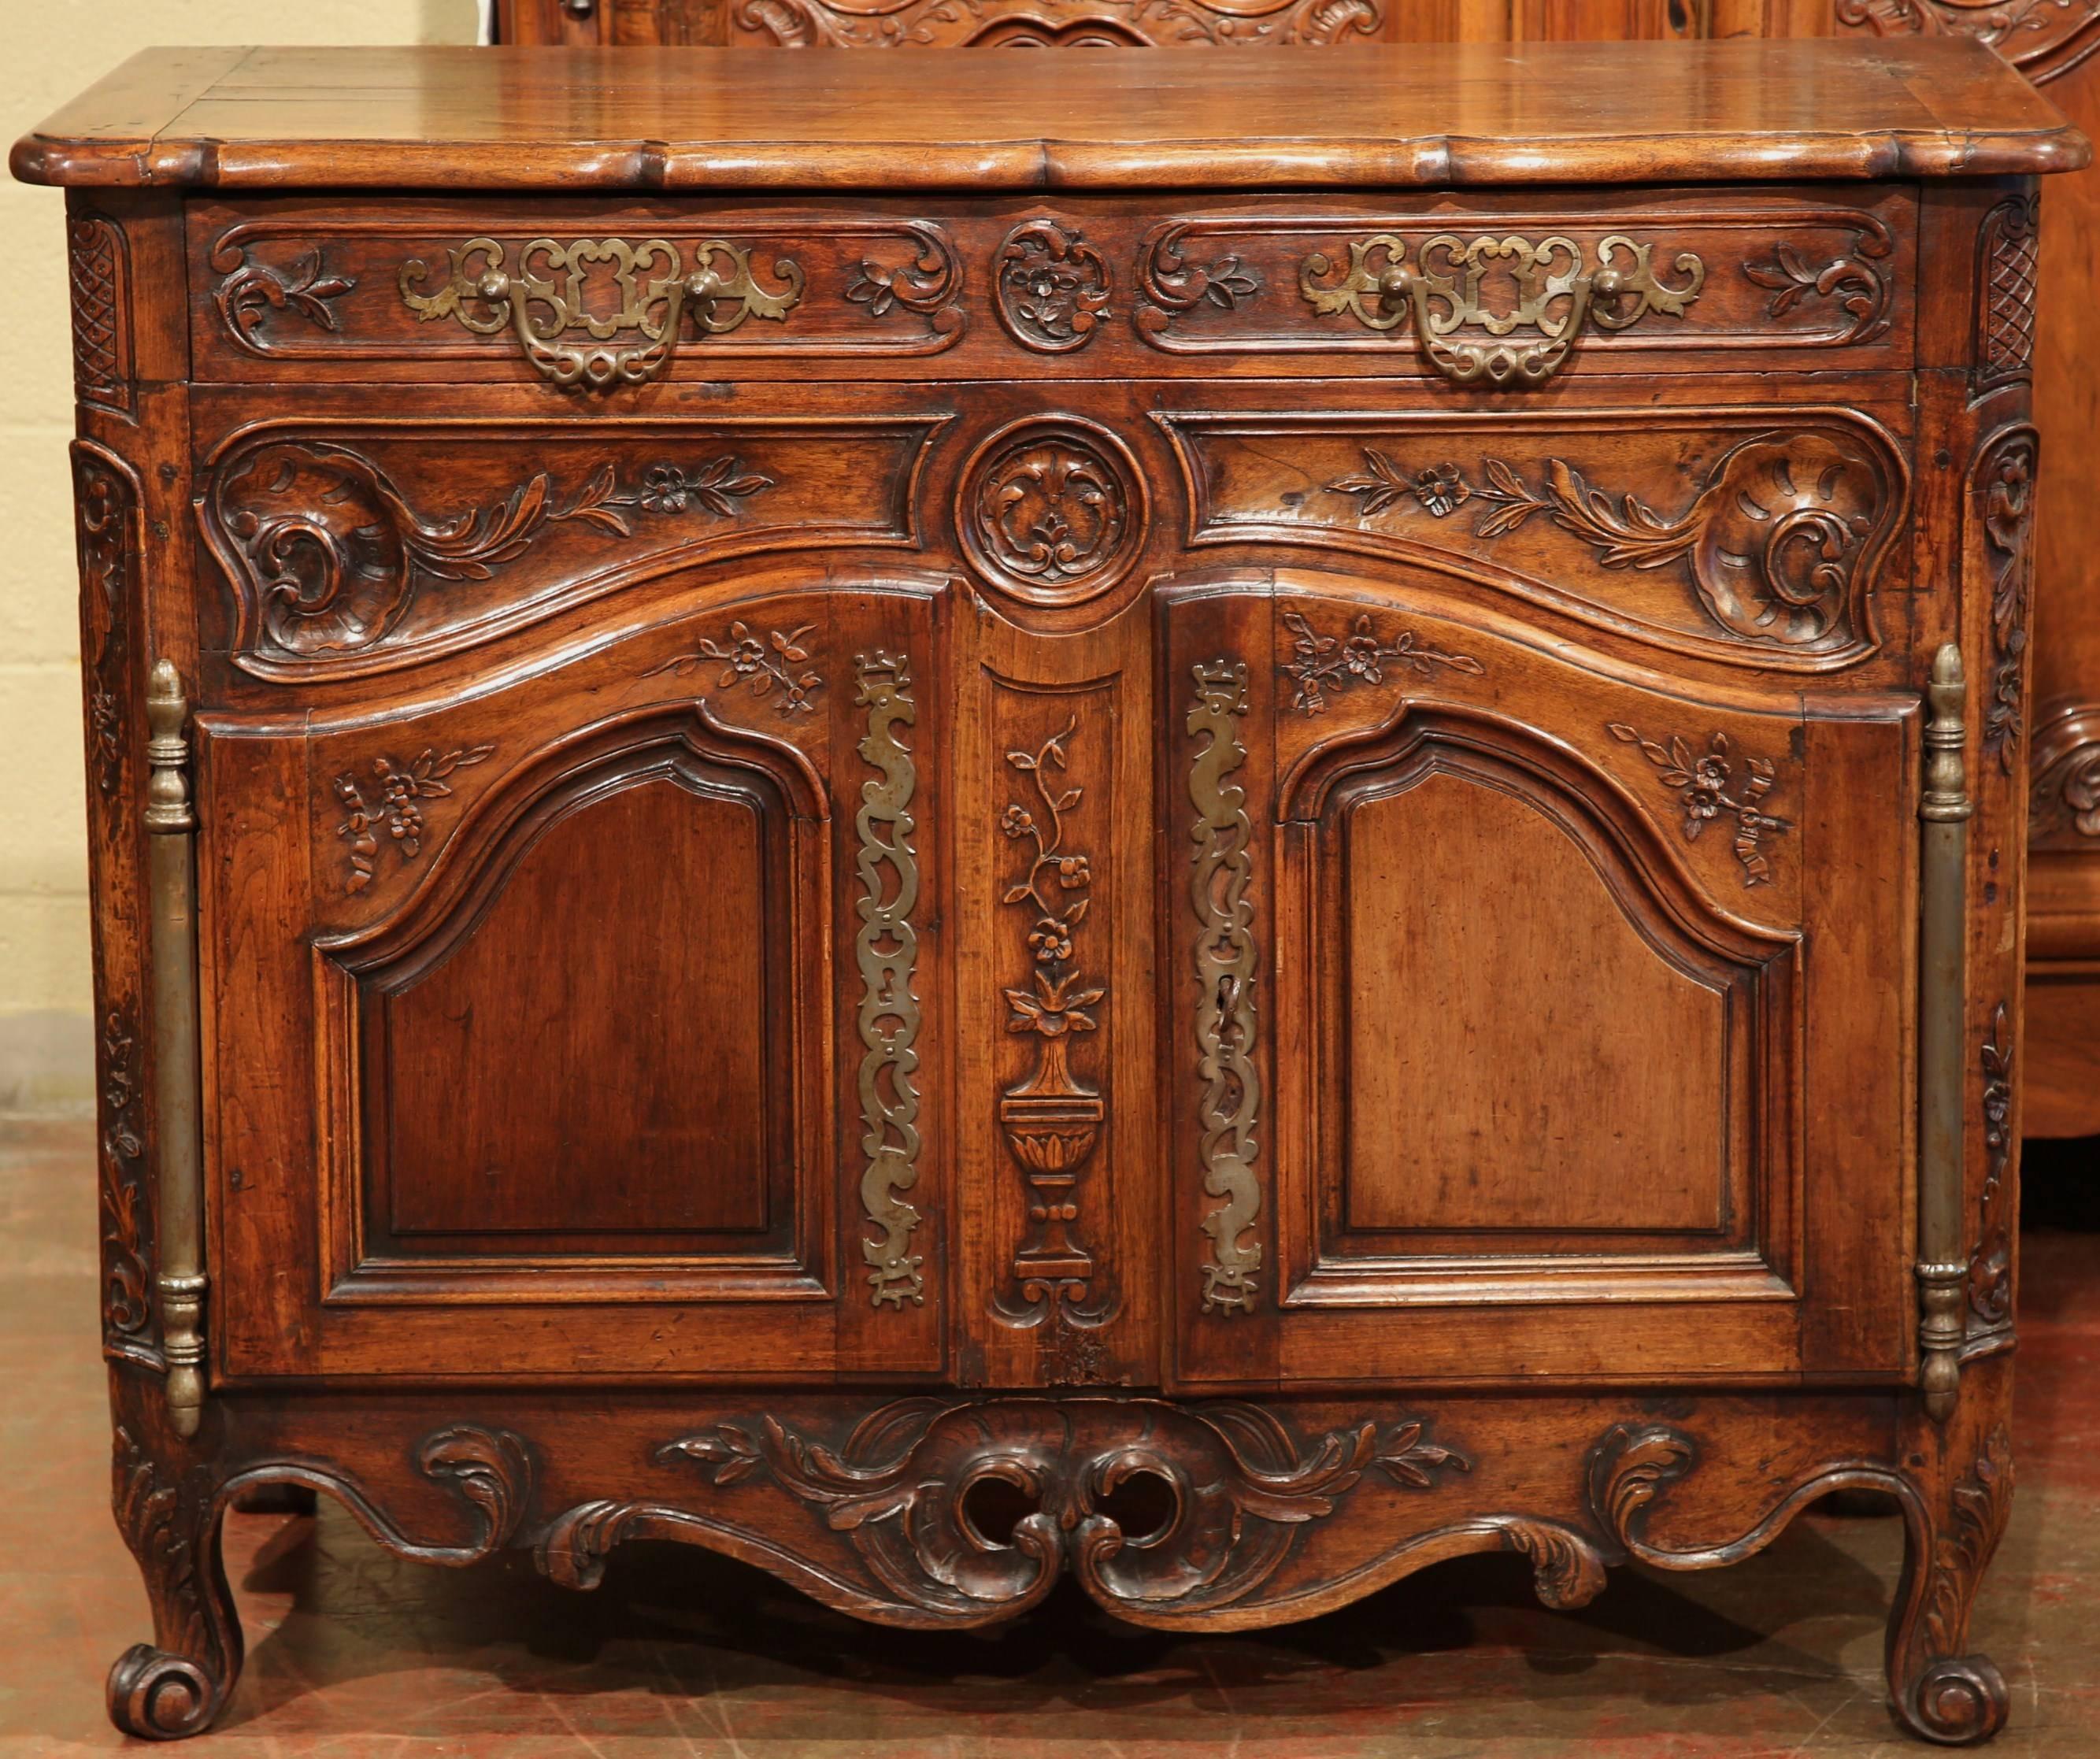 Exquisite antique buffet from Avignon, France, circa 1760. With a large drawer across the front, a pair of carved doors underneath with a carved vase in the center and flowers on the sides, scrolled feet at the bottom with a pierce apron in between.